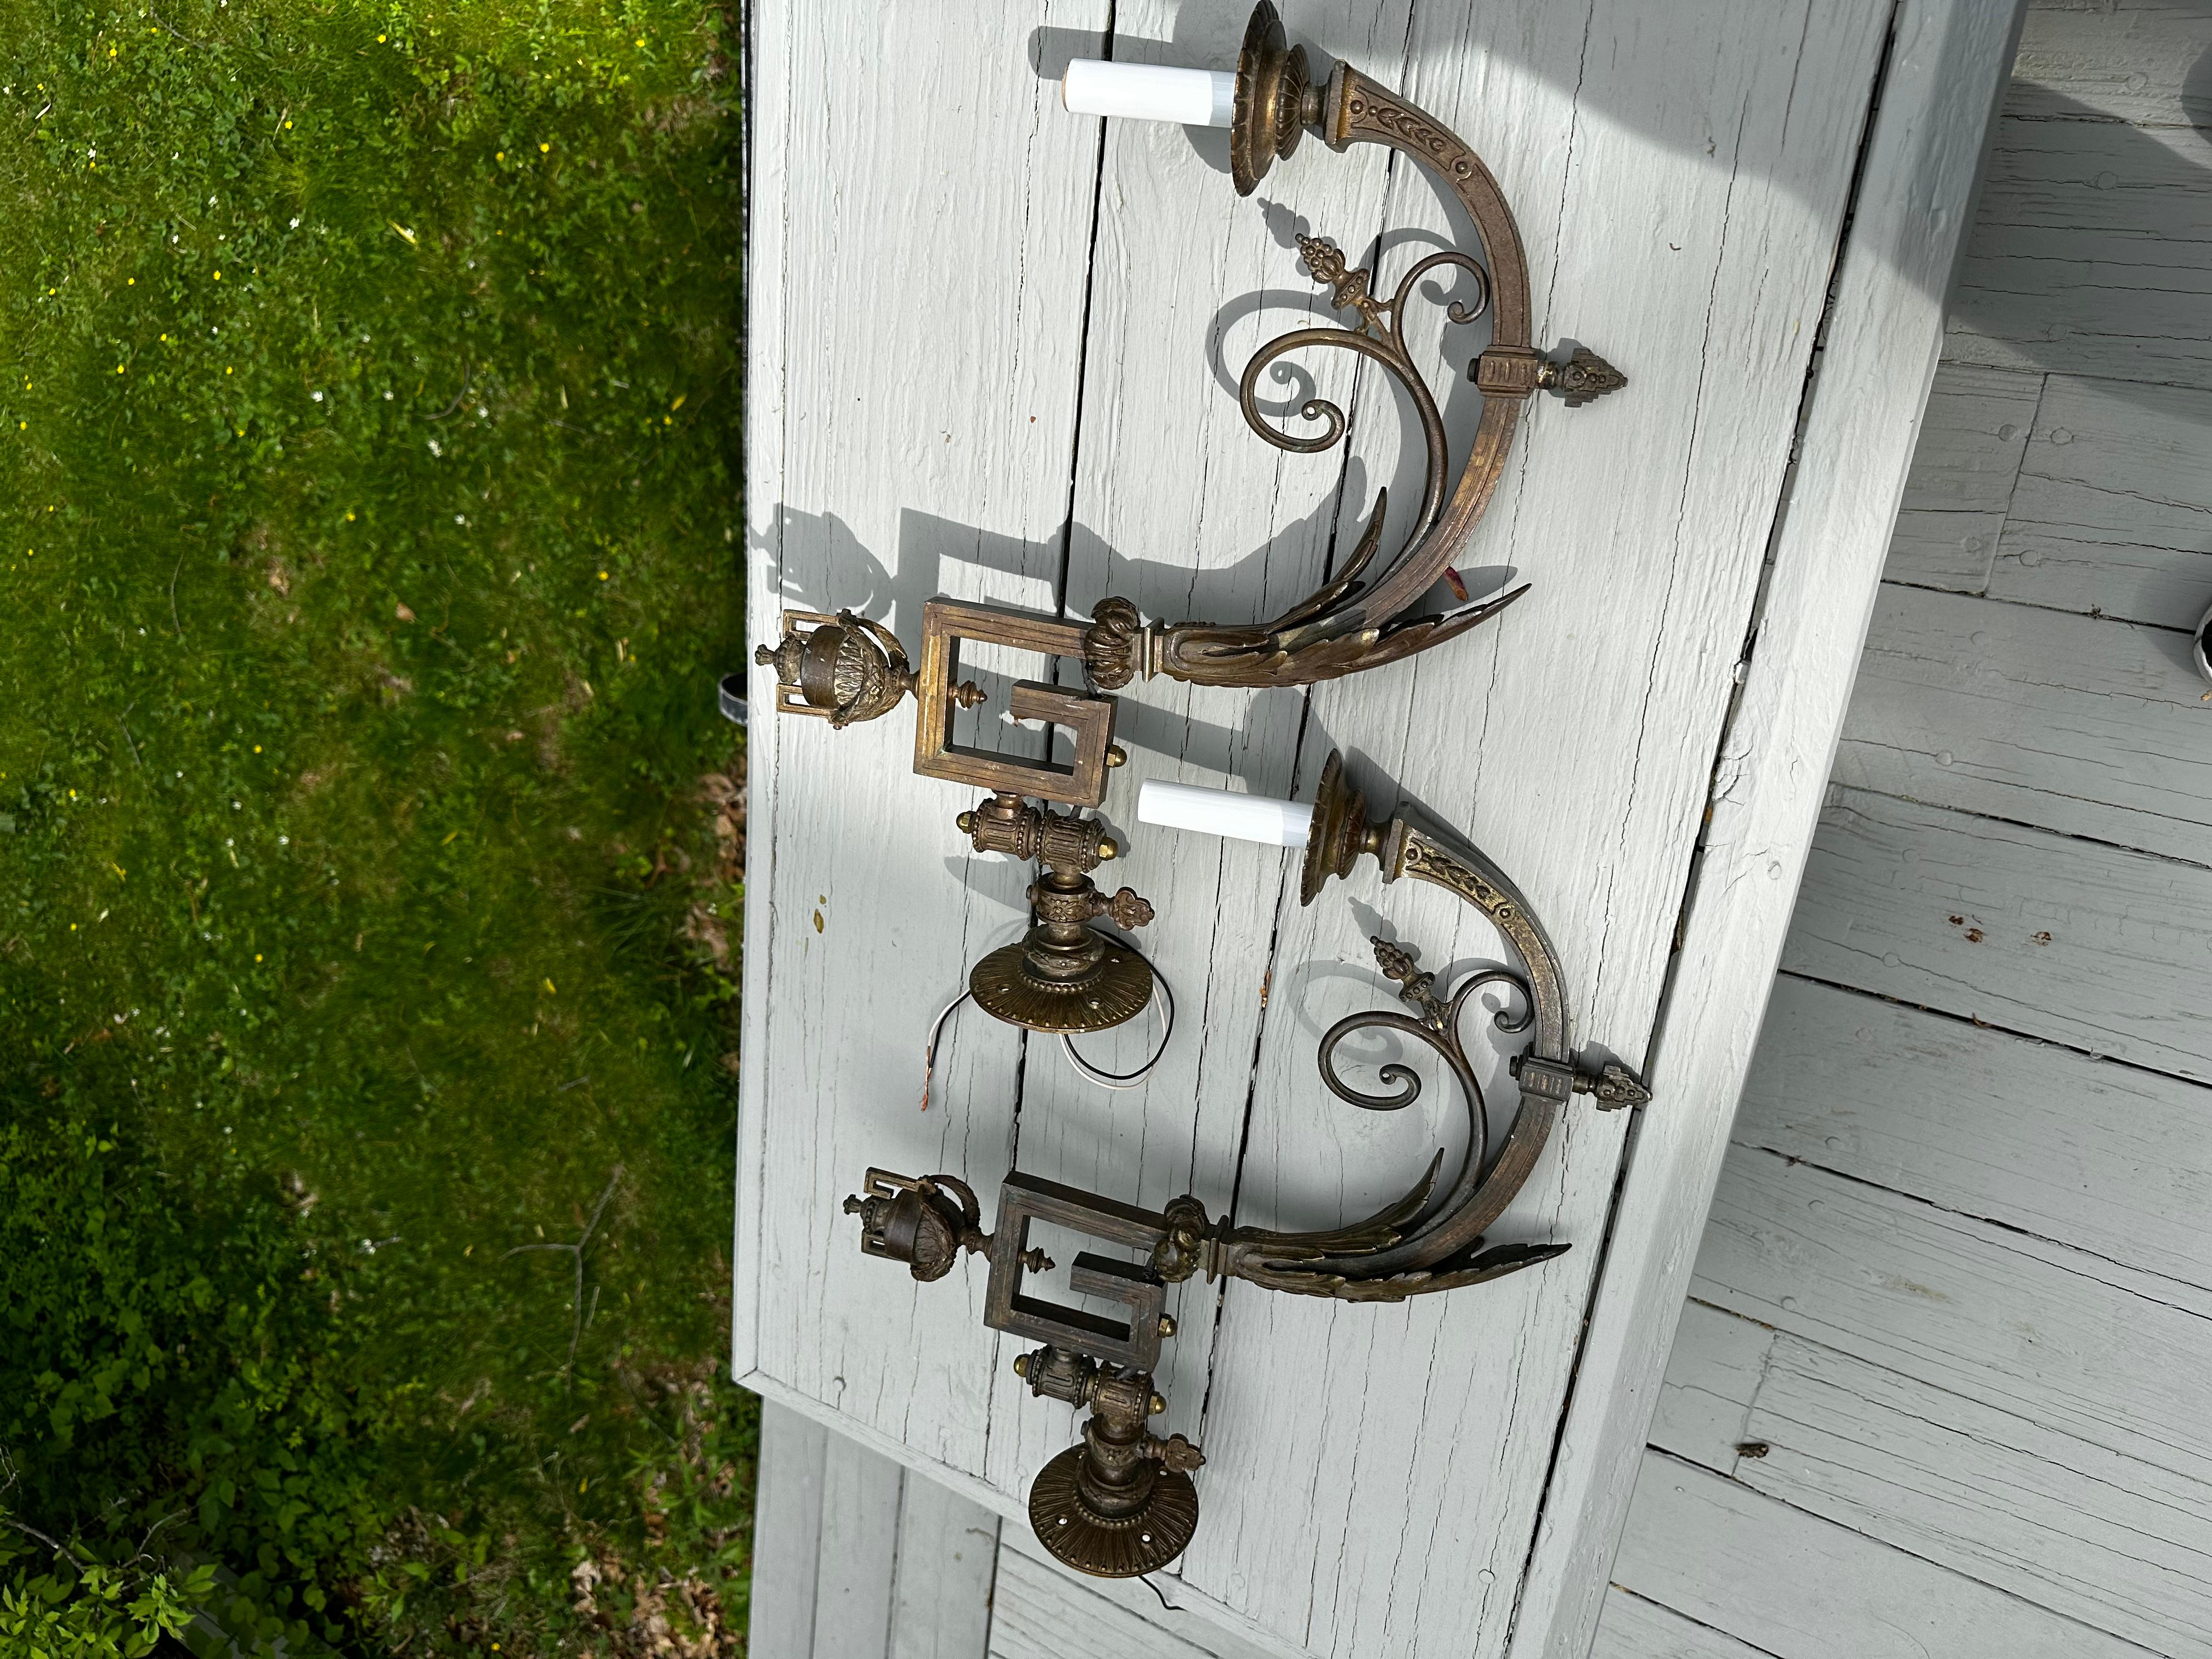 Old Lights On is pleased to offer this amazing pair of vintage cast brass gas wall sconces. They have been fully restored, wired and are ready to install in your home. We ship everywhere. They will go well with other fixtures and furnishings. Great